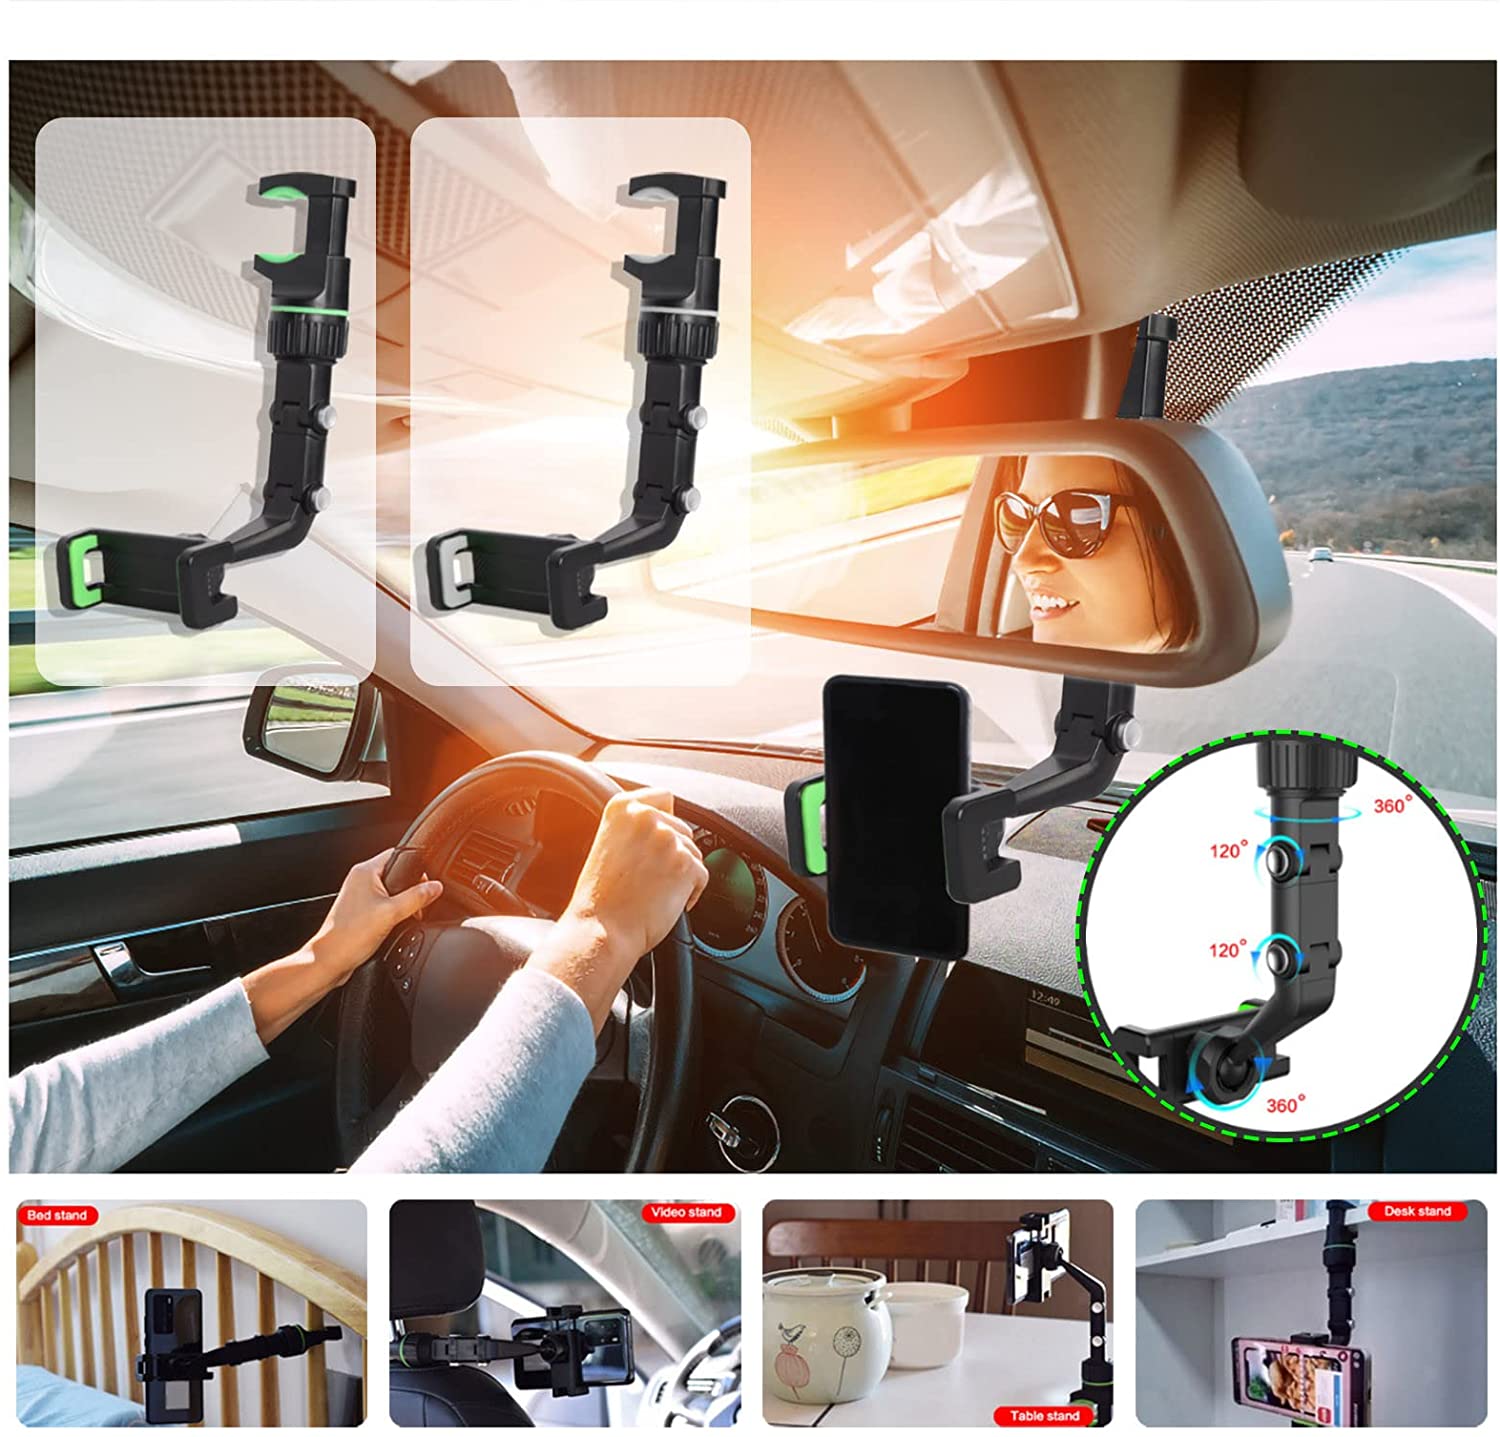 Multifunctional Rearview Mirror Phone Holder Universal 360° Rotating Phone Stand